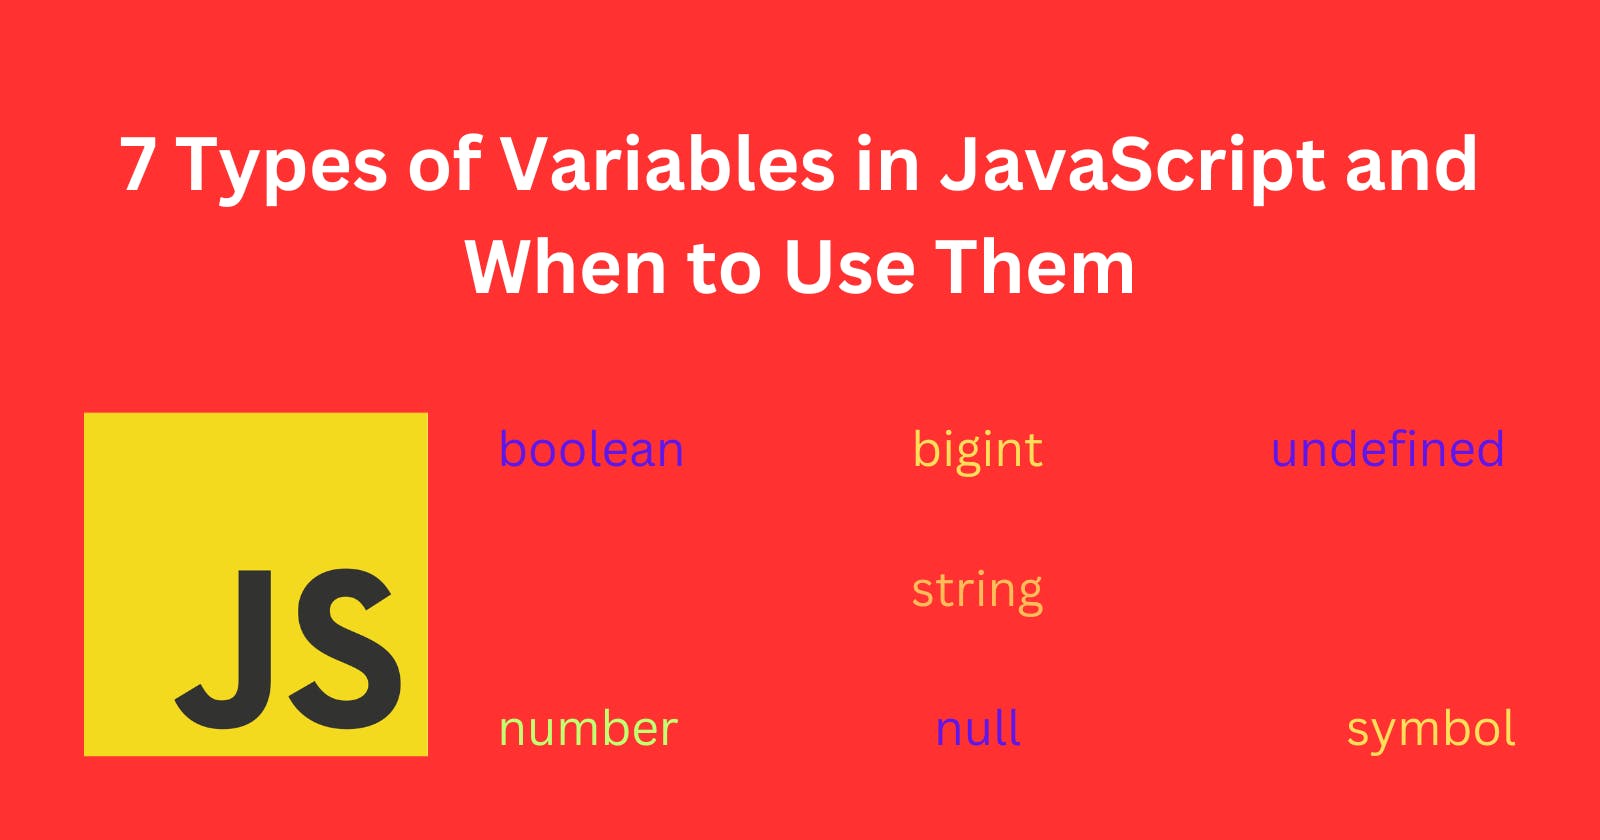 7 Types of Variables in JavaScript and When to Use Them